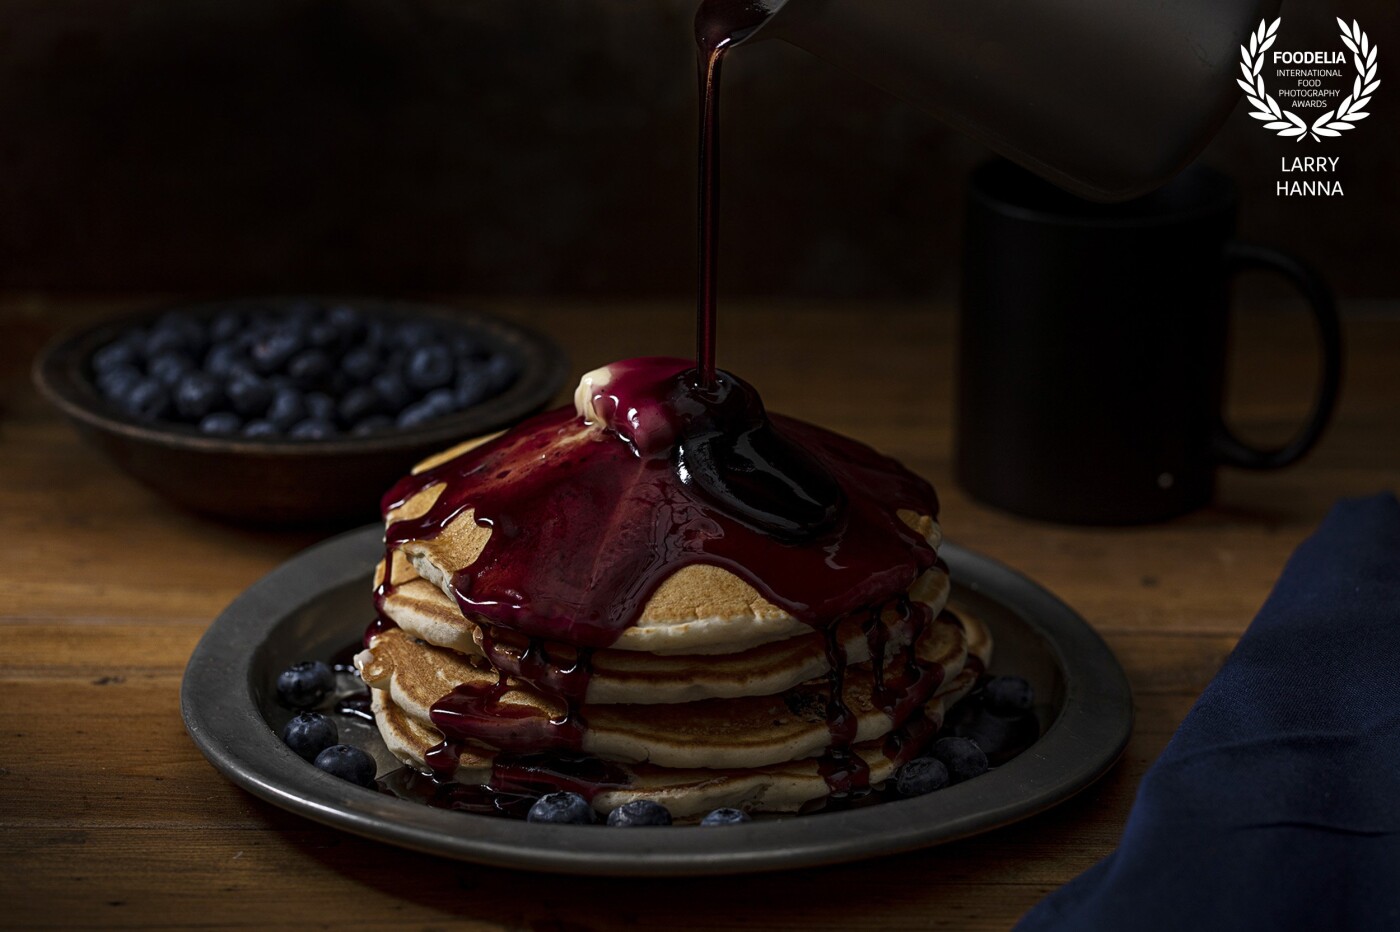 I love a stack of blueberry pancakes in the morning and recently bought some blueberry syrup and loved the way it enhanced the beauty of the pancakes.  I decided that I needed to create an image emphasizing the syrup.  I created this image in my home utilizing strobe light to freeze the action of the pouring syrup.